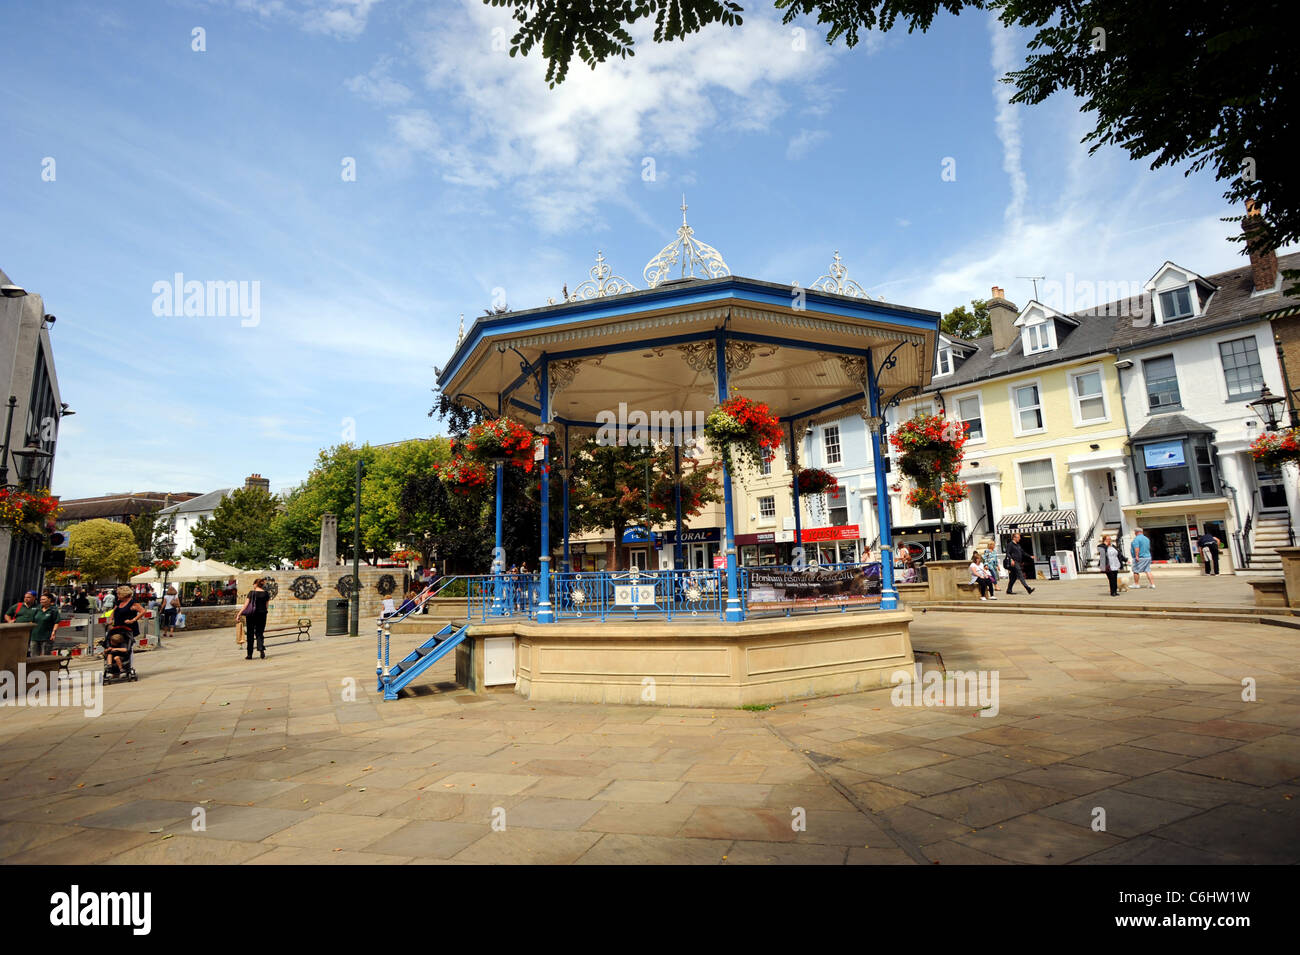 The Bandstand in The Carfax Horsham town centre Stock Photo